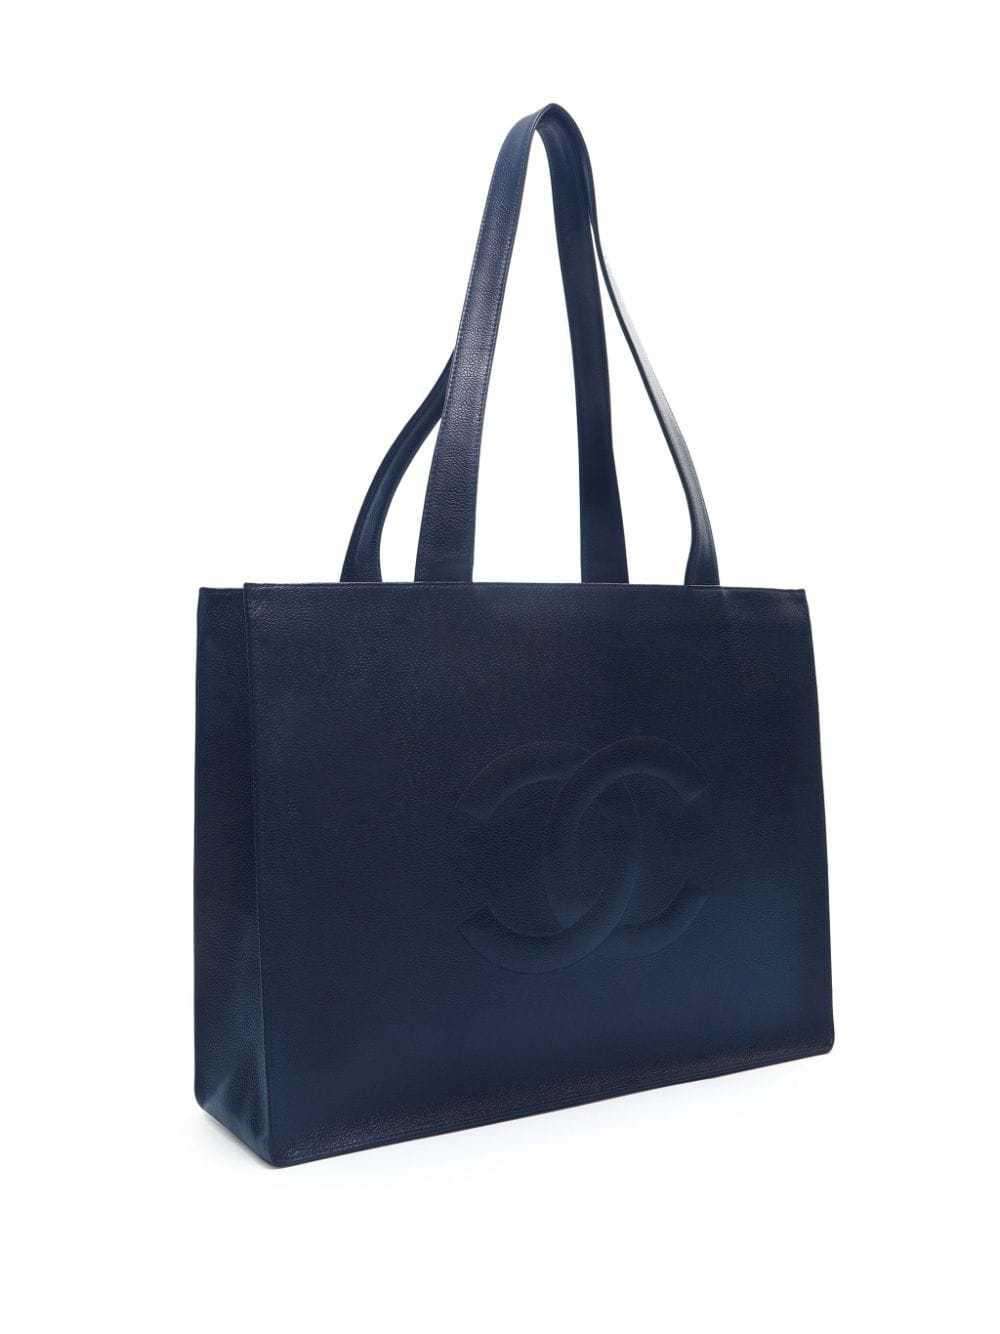 CHANEL Pre-Owned 1998 Interlocking CC tote bag - … - image 3